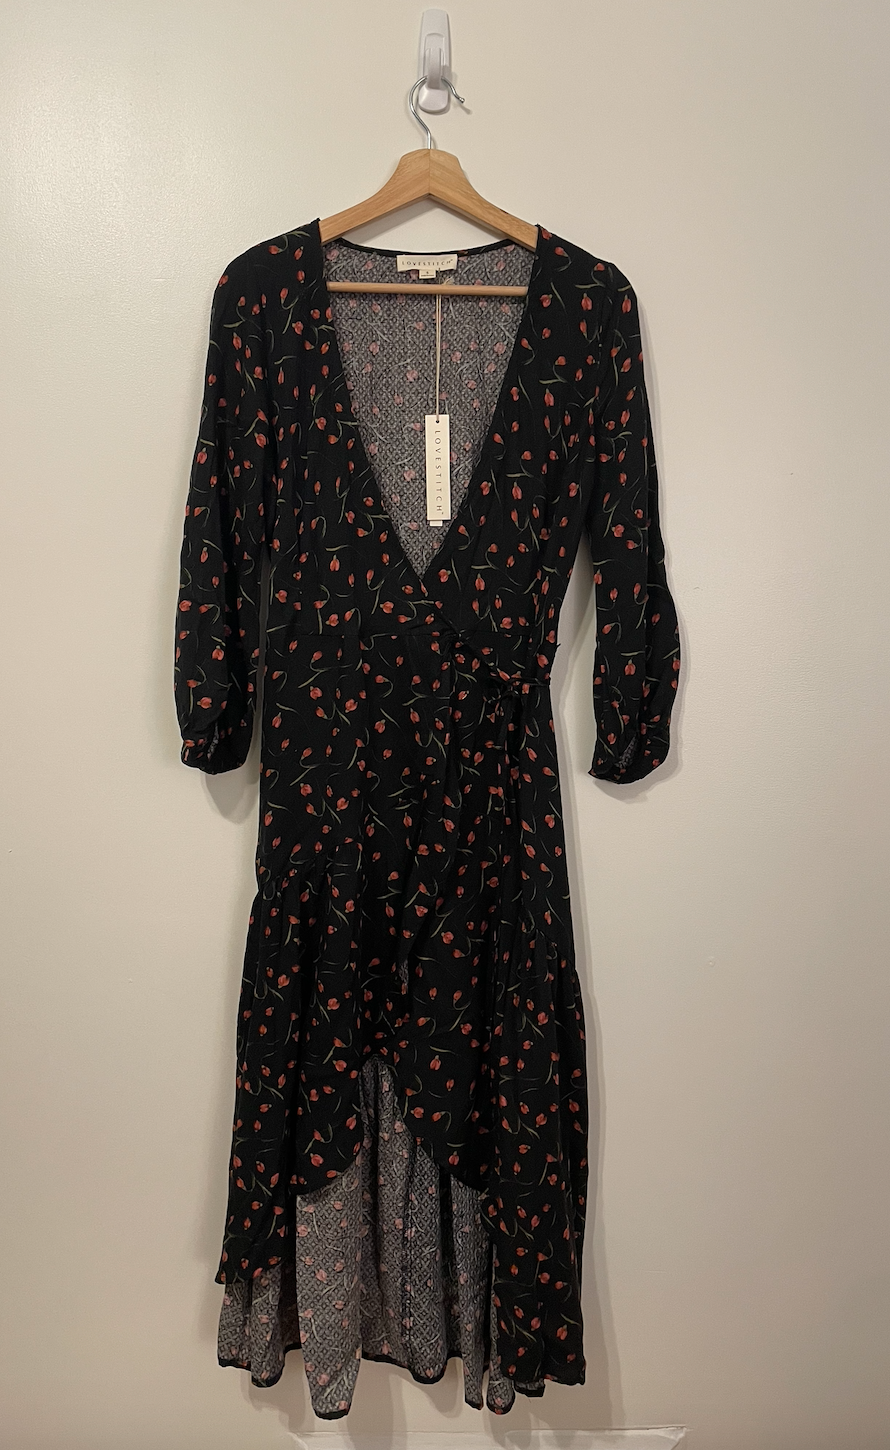 New with tags - black floral wrap dress - women's size small